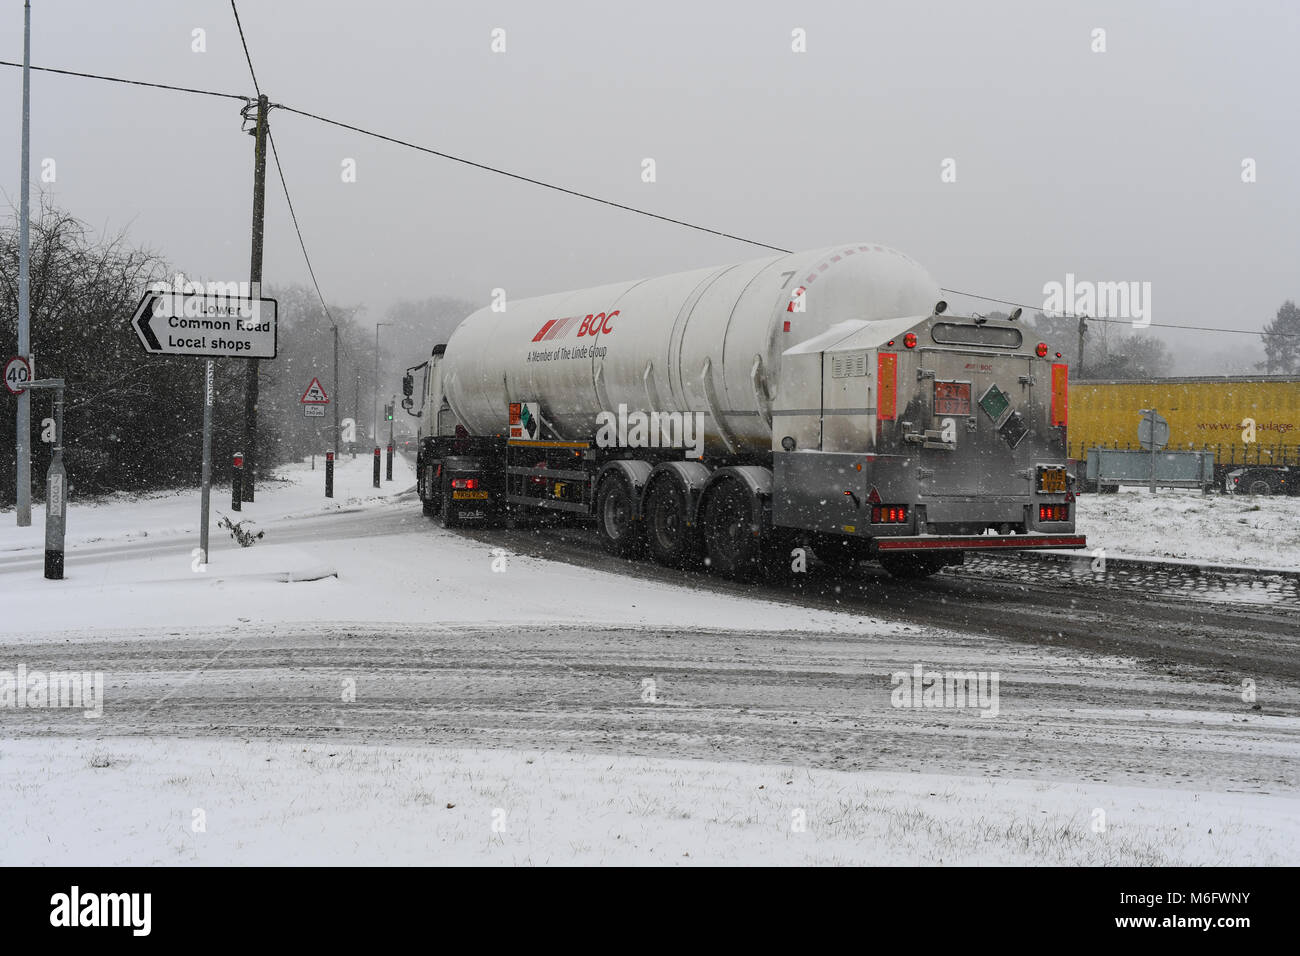 A BOC tanker carrying dangerous cargo on a snow covered A36 in treacherous conditions after snow storm. Stock Photo